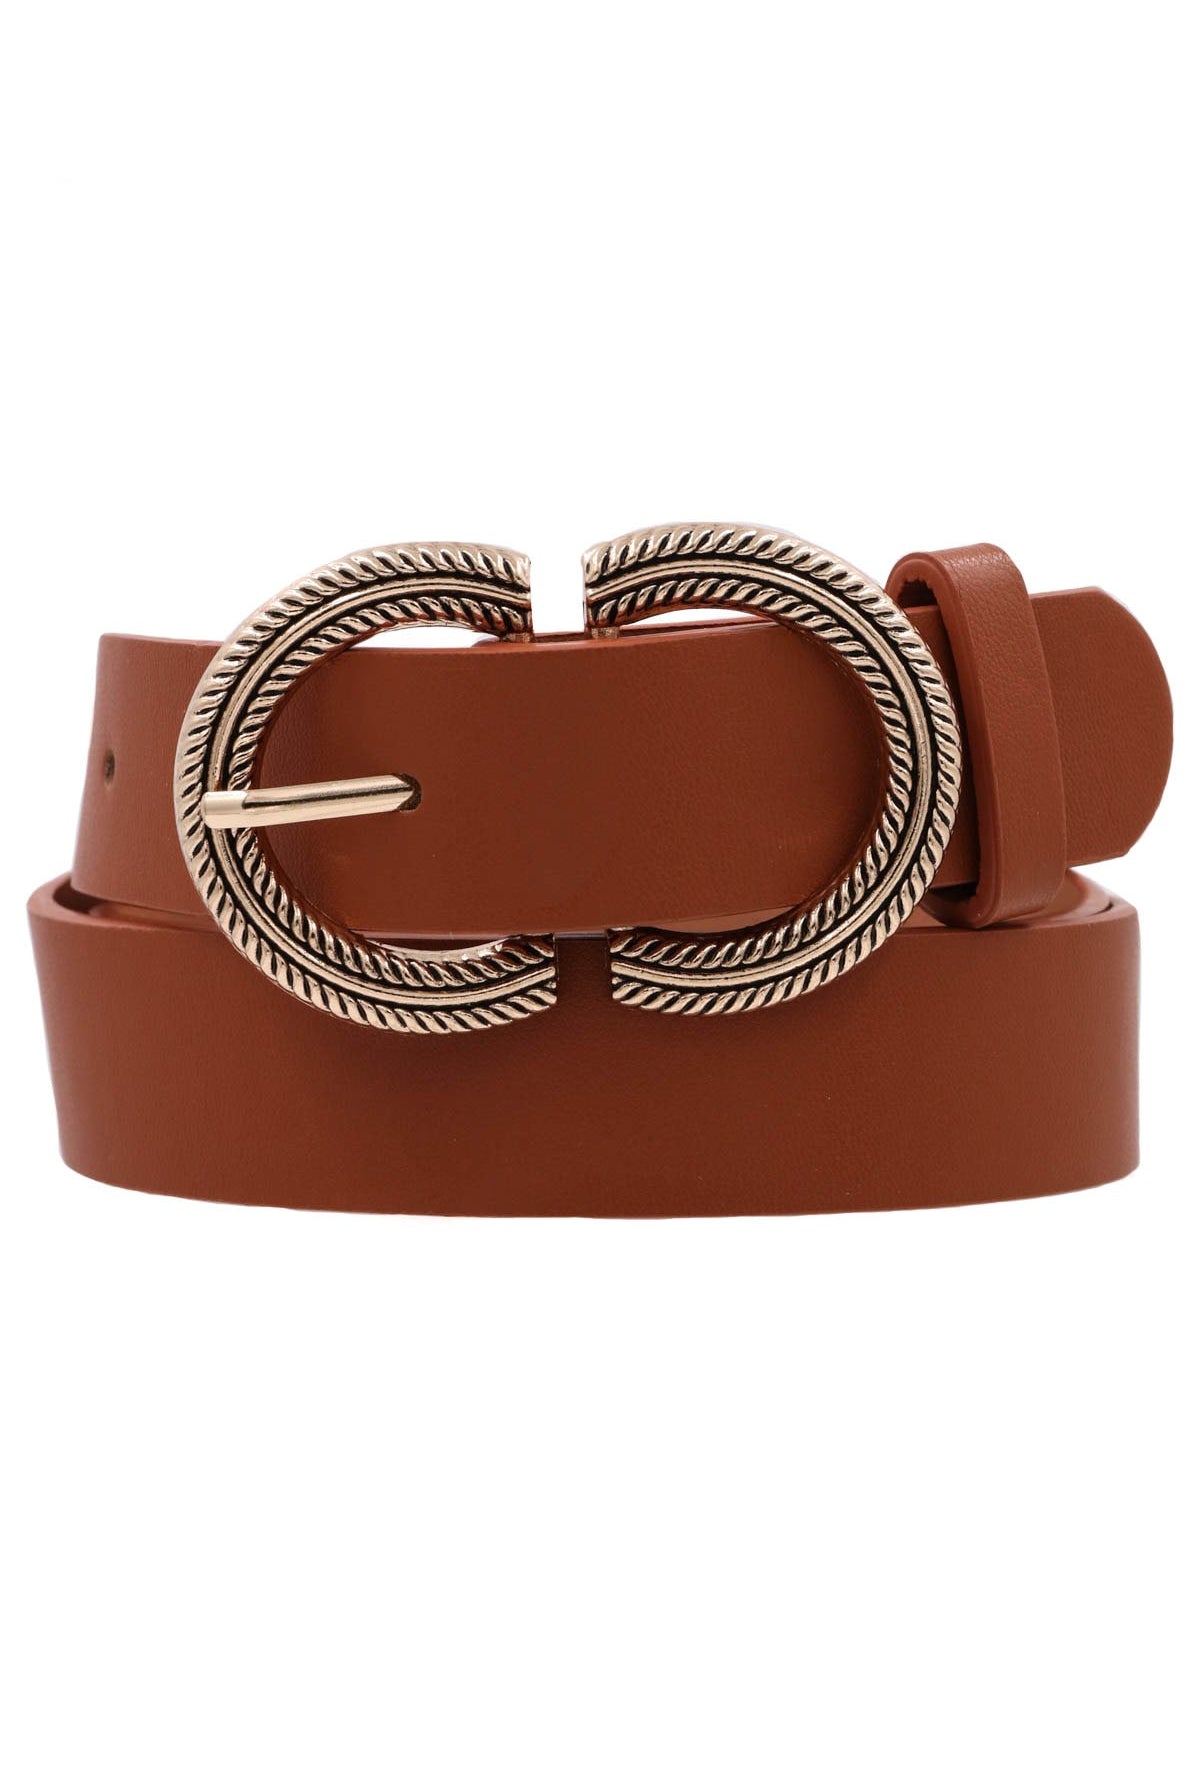 Bruce Vegan Faux Leather Textured Metal Buckle Belt - Be You Boutique